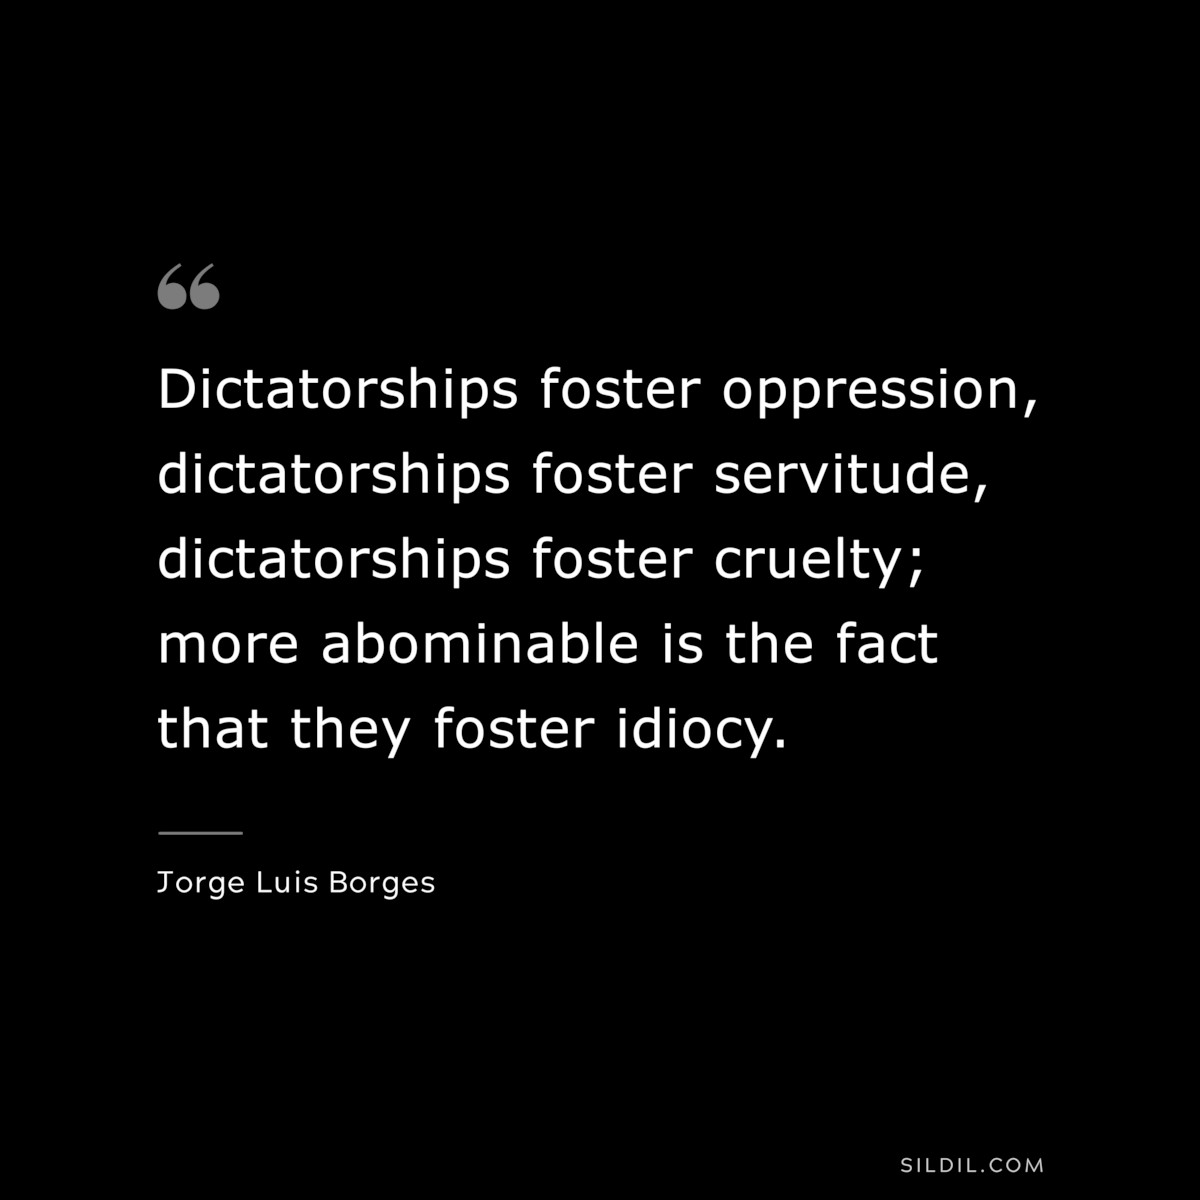 Dictatorships foster oppression, dictatorships foster servitude, dictatorships foster cruelty; more abominable is the fact that they foster idiocy. ― Jorge Luis Borges